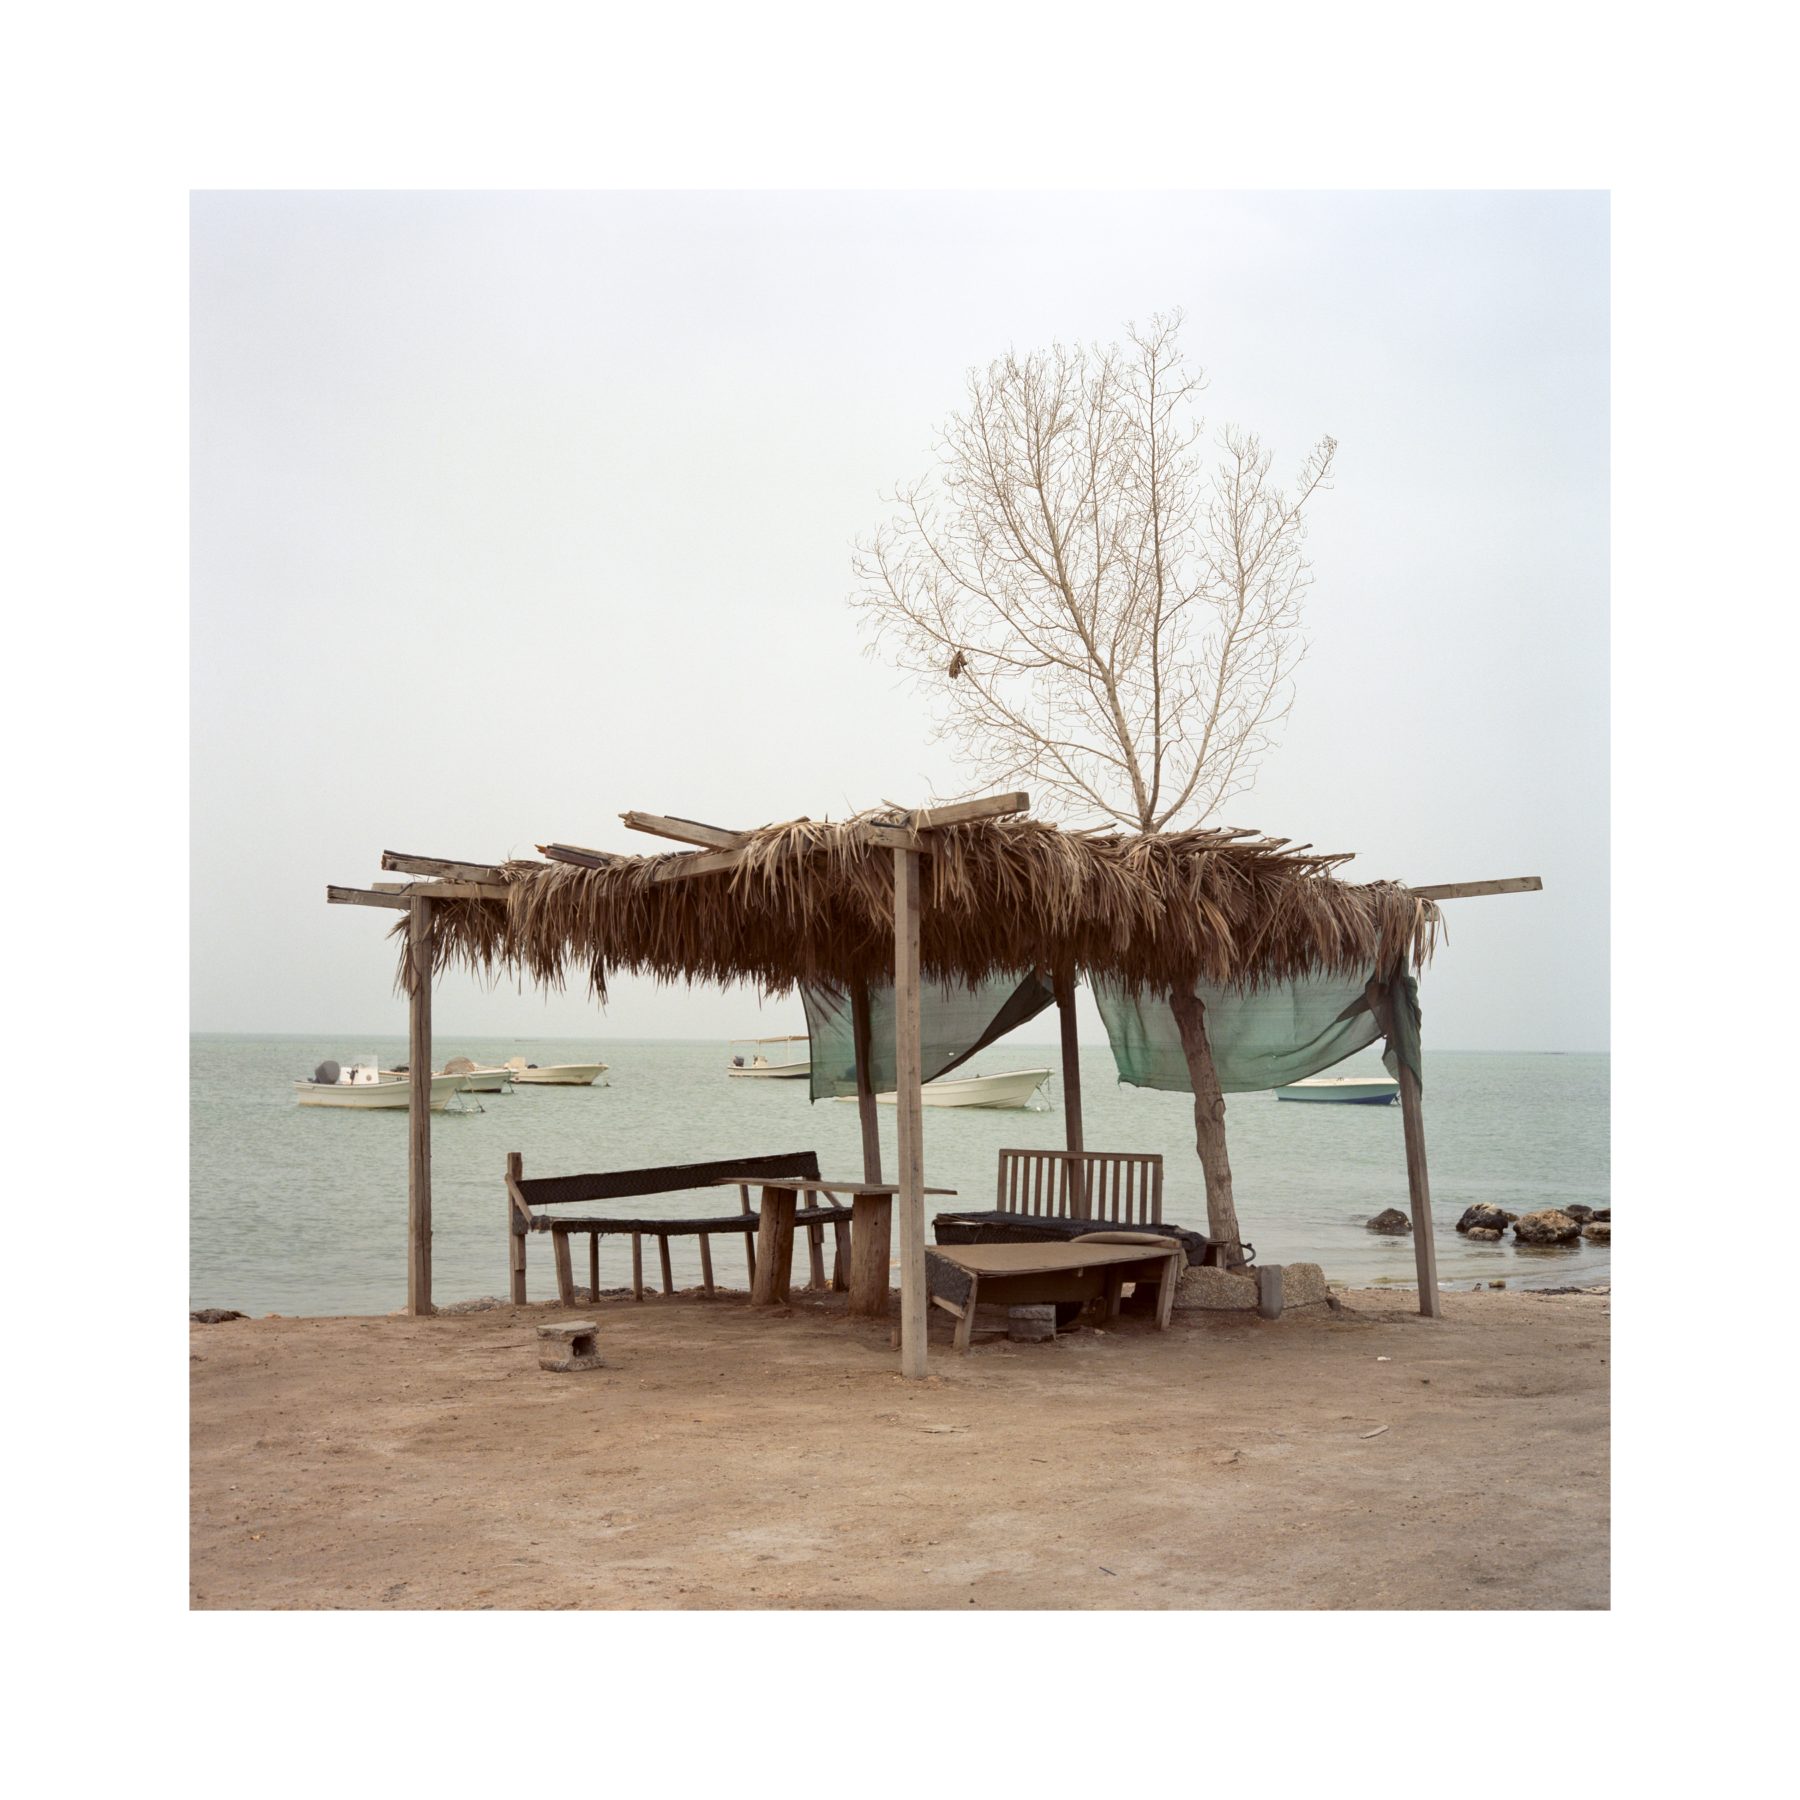 Sea shack Middle East Art Photography Camille Zakharia